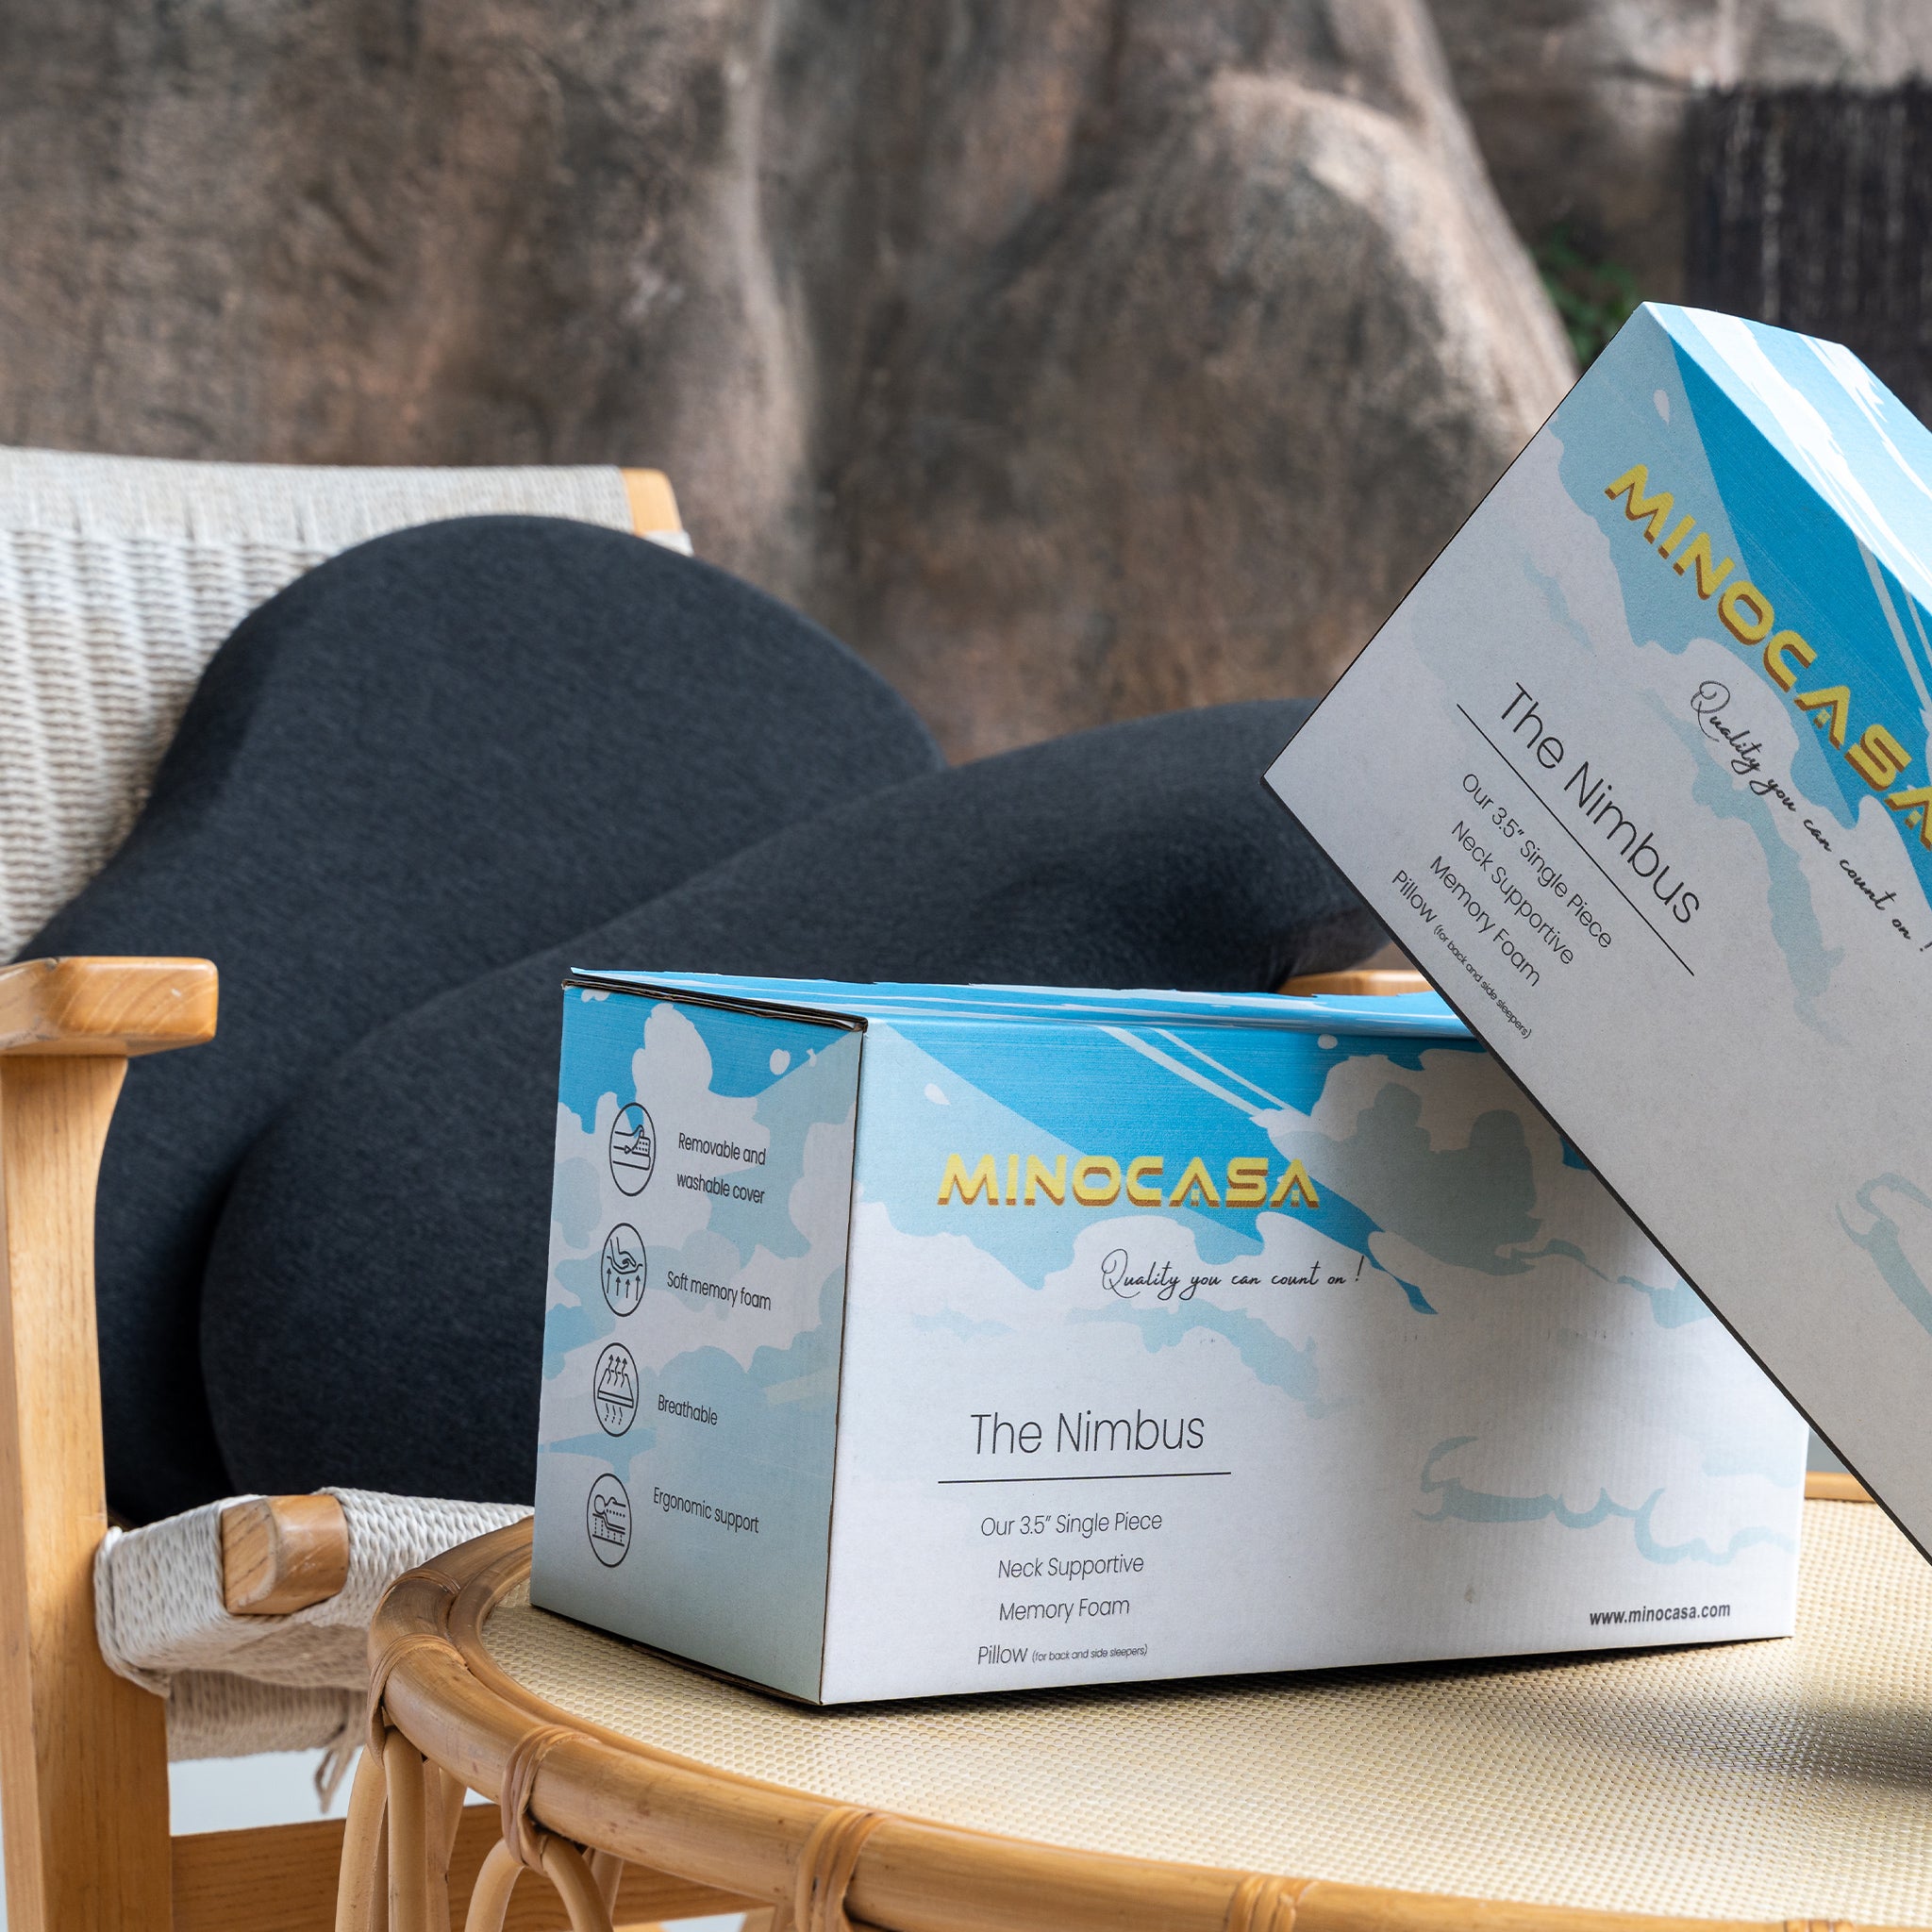 Minocasa Ergonomic and Orthopaedic Neck Supportive Pillow Packaging